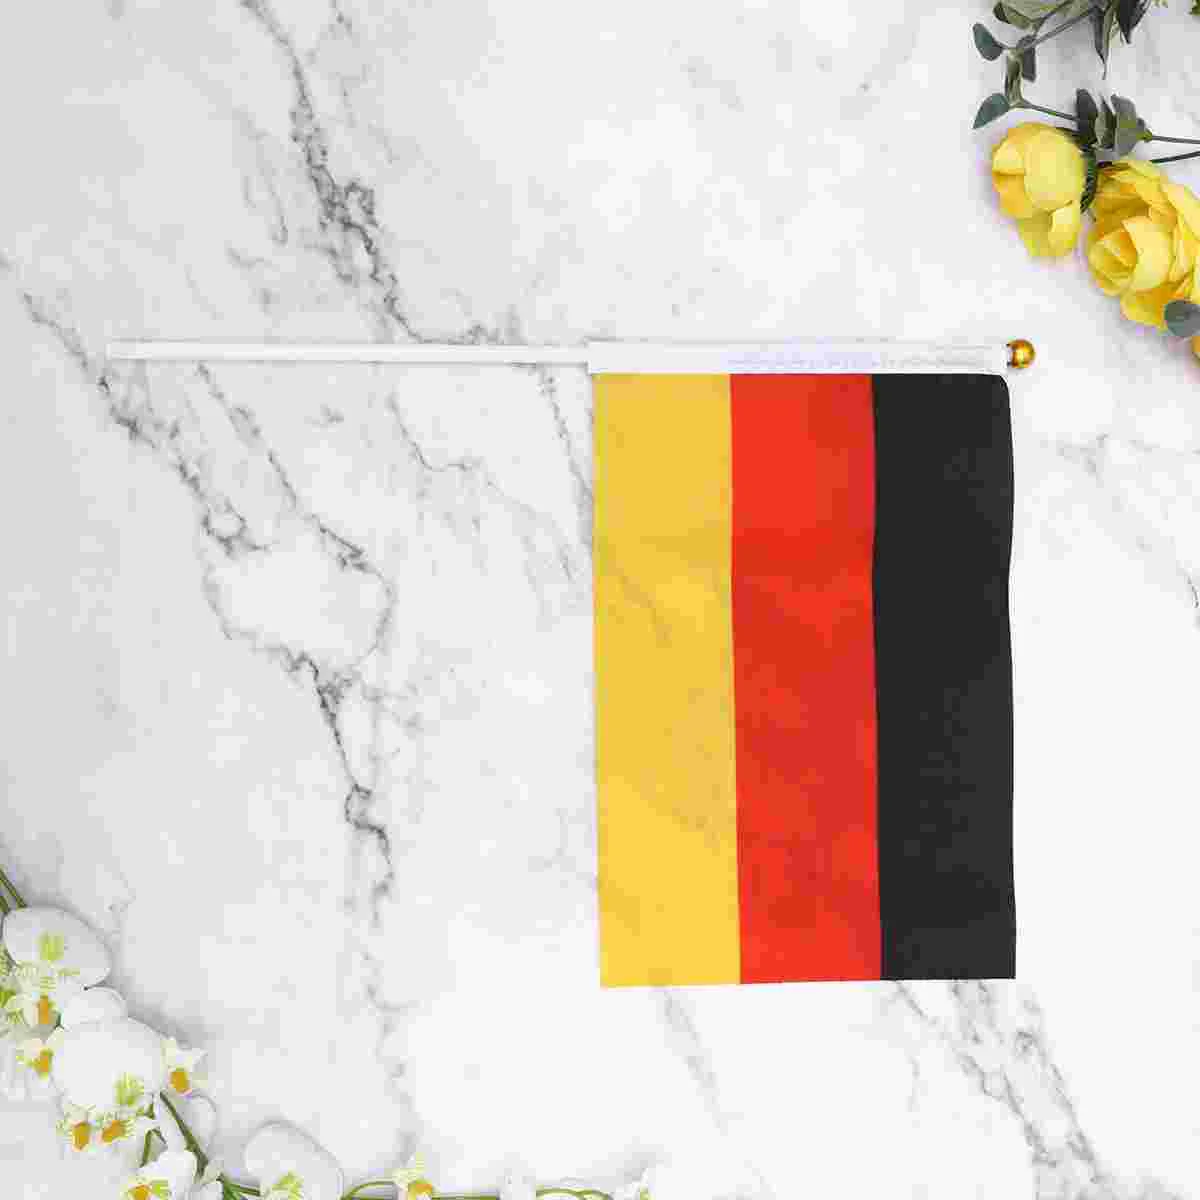 

National Handheld Flag 50pcs Germany Flag on Small National Flags with Pole for Parades Events Festival Celebrations